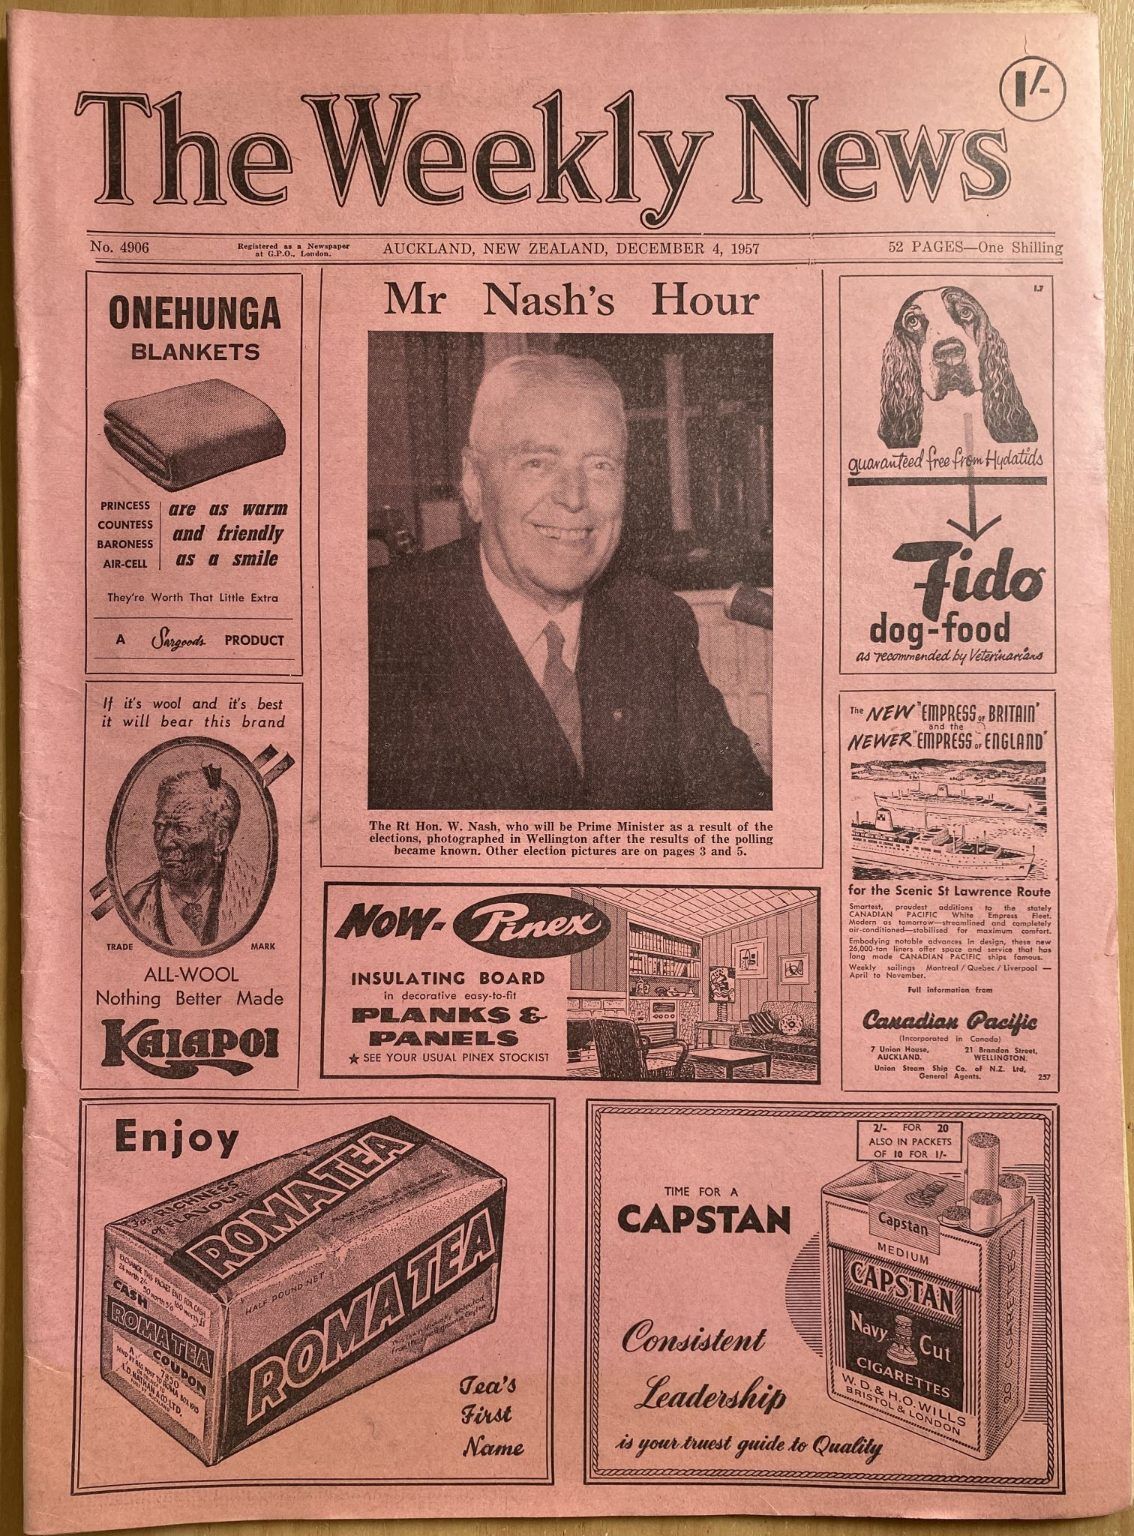 OLD NEWSPAPER: The Weekly News, No. 4906, 4 December 1957